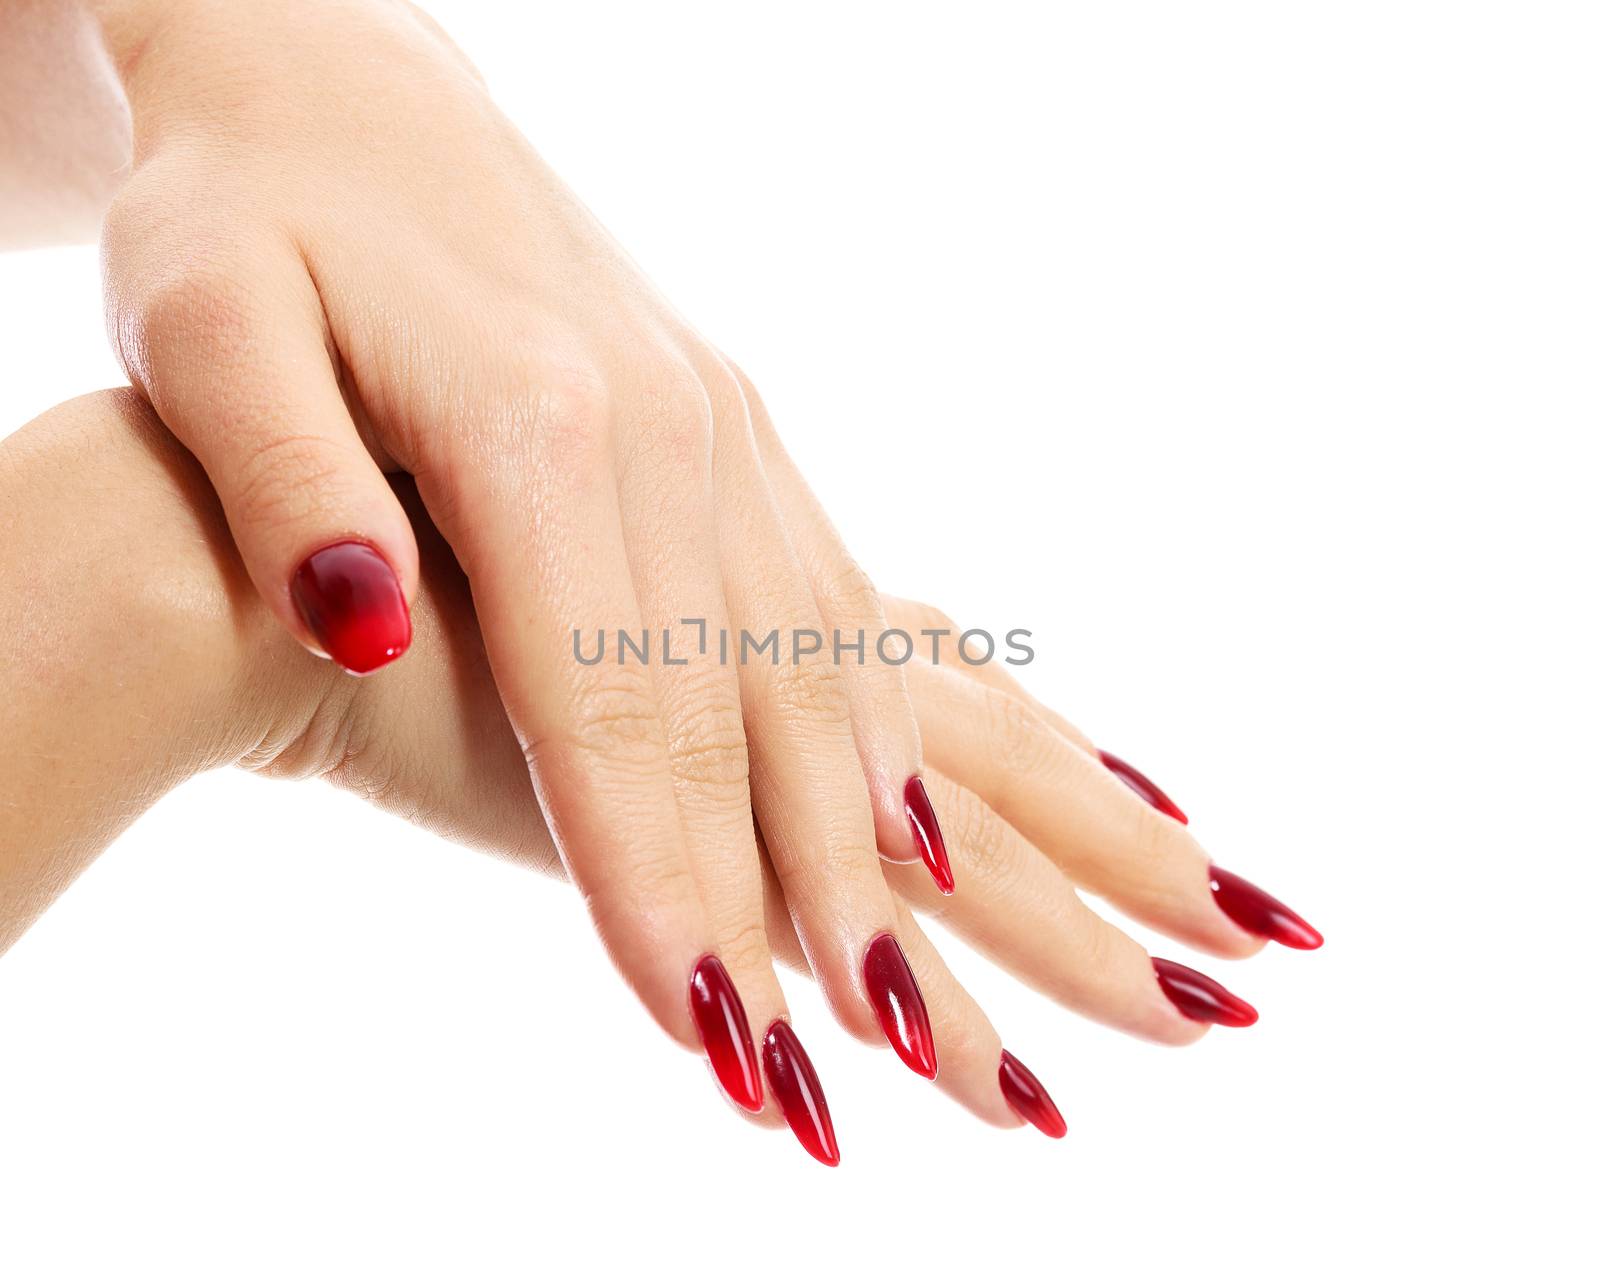 Female hands with red fingernails, white background, isolated by Nobilior